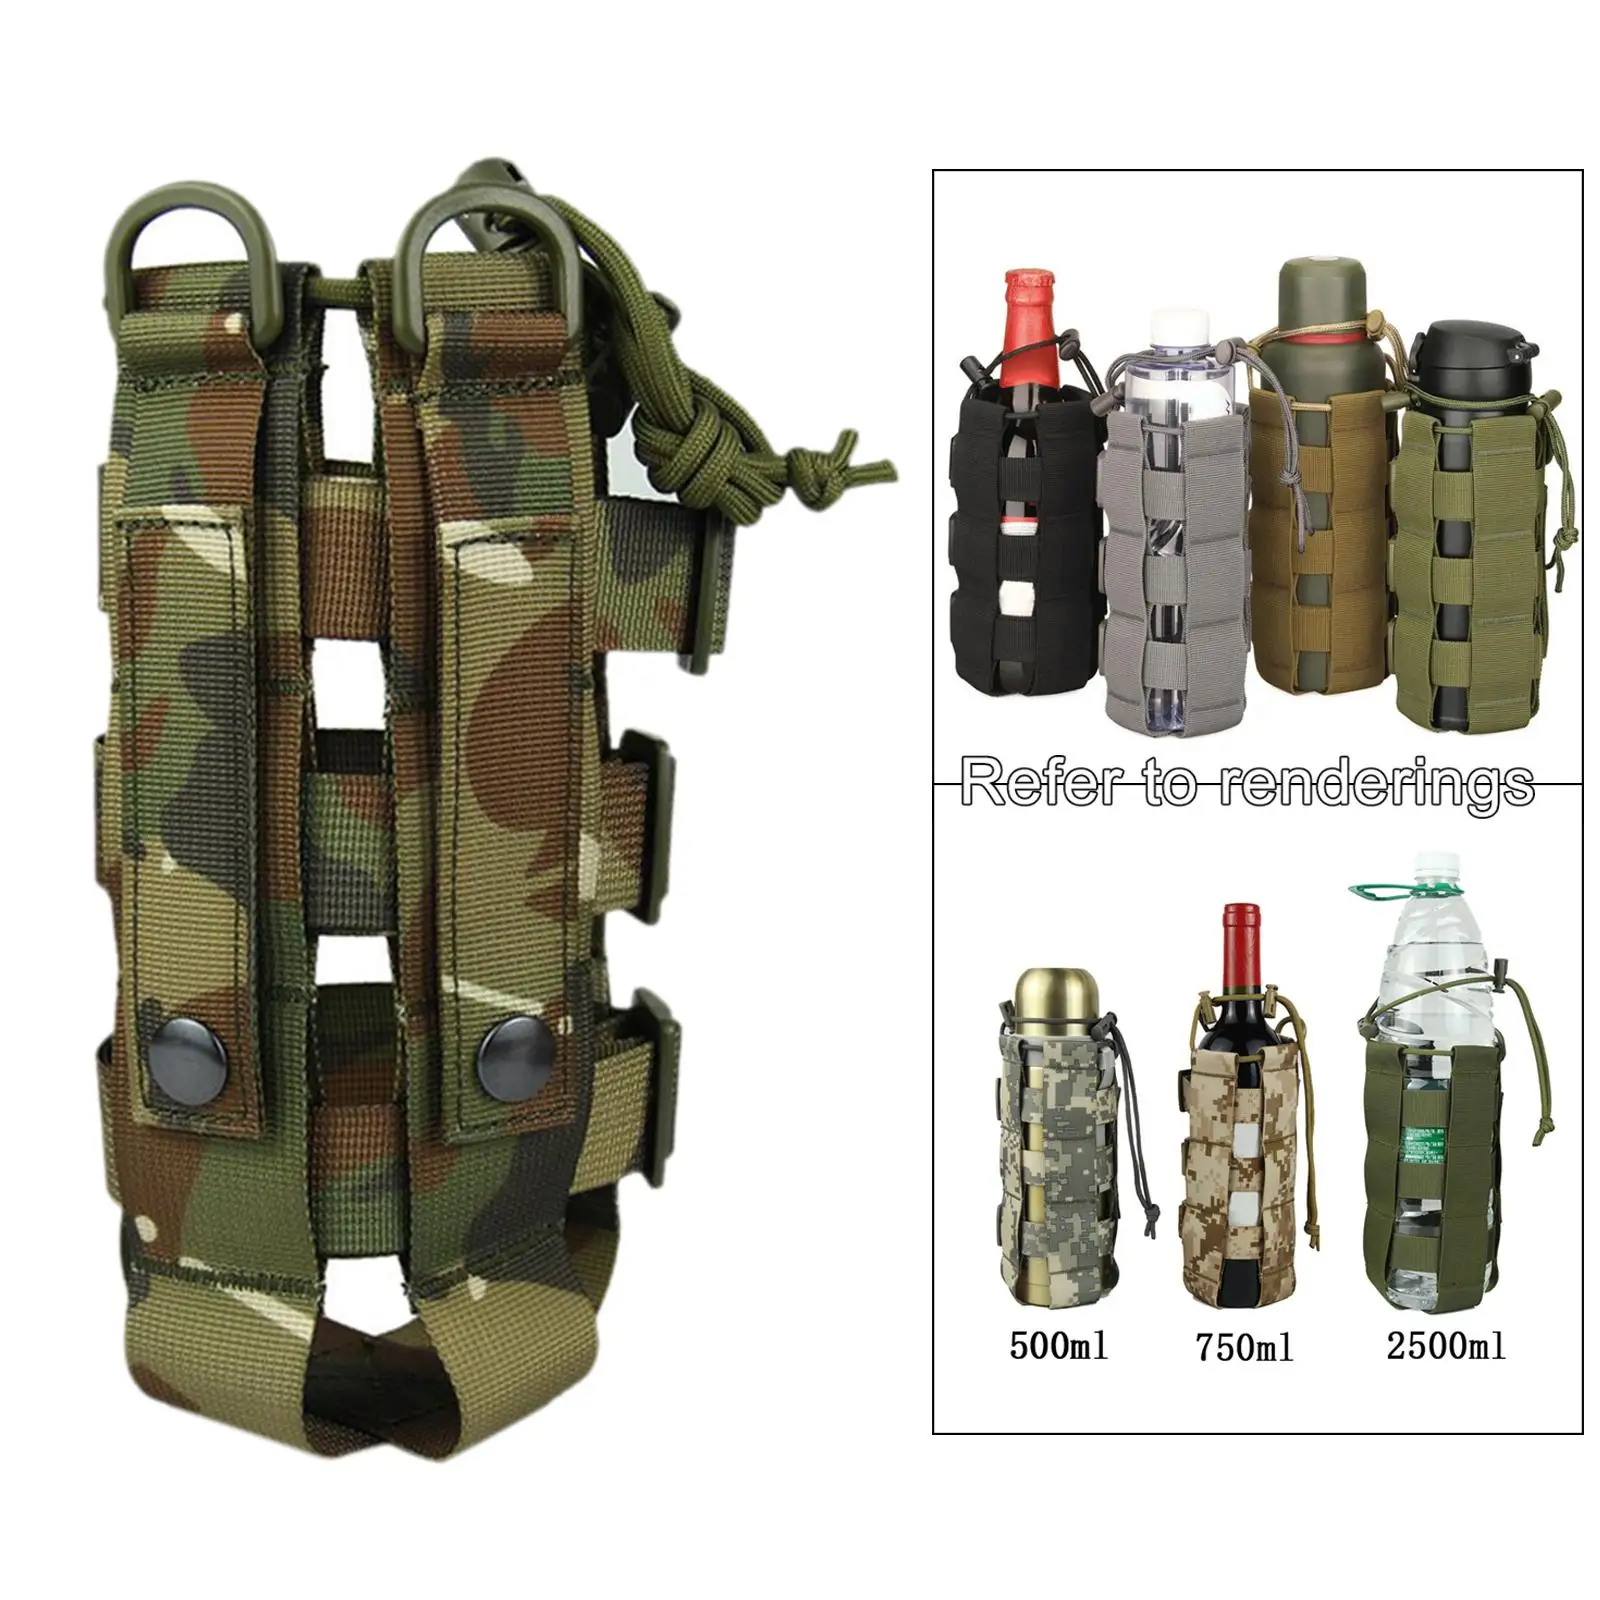 Water Bottles Pouch Bag    Drawstring Water Bottle Holder  Carrier Attachment Travel Camping Hiking Outdoor Sports Gear